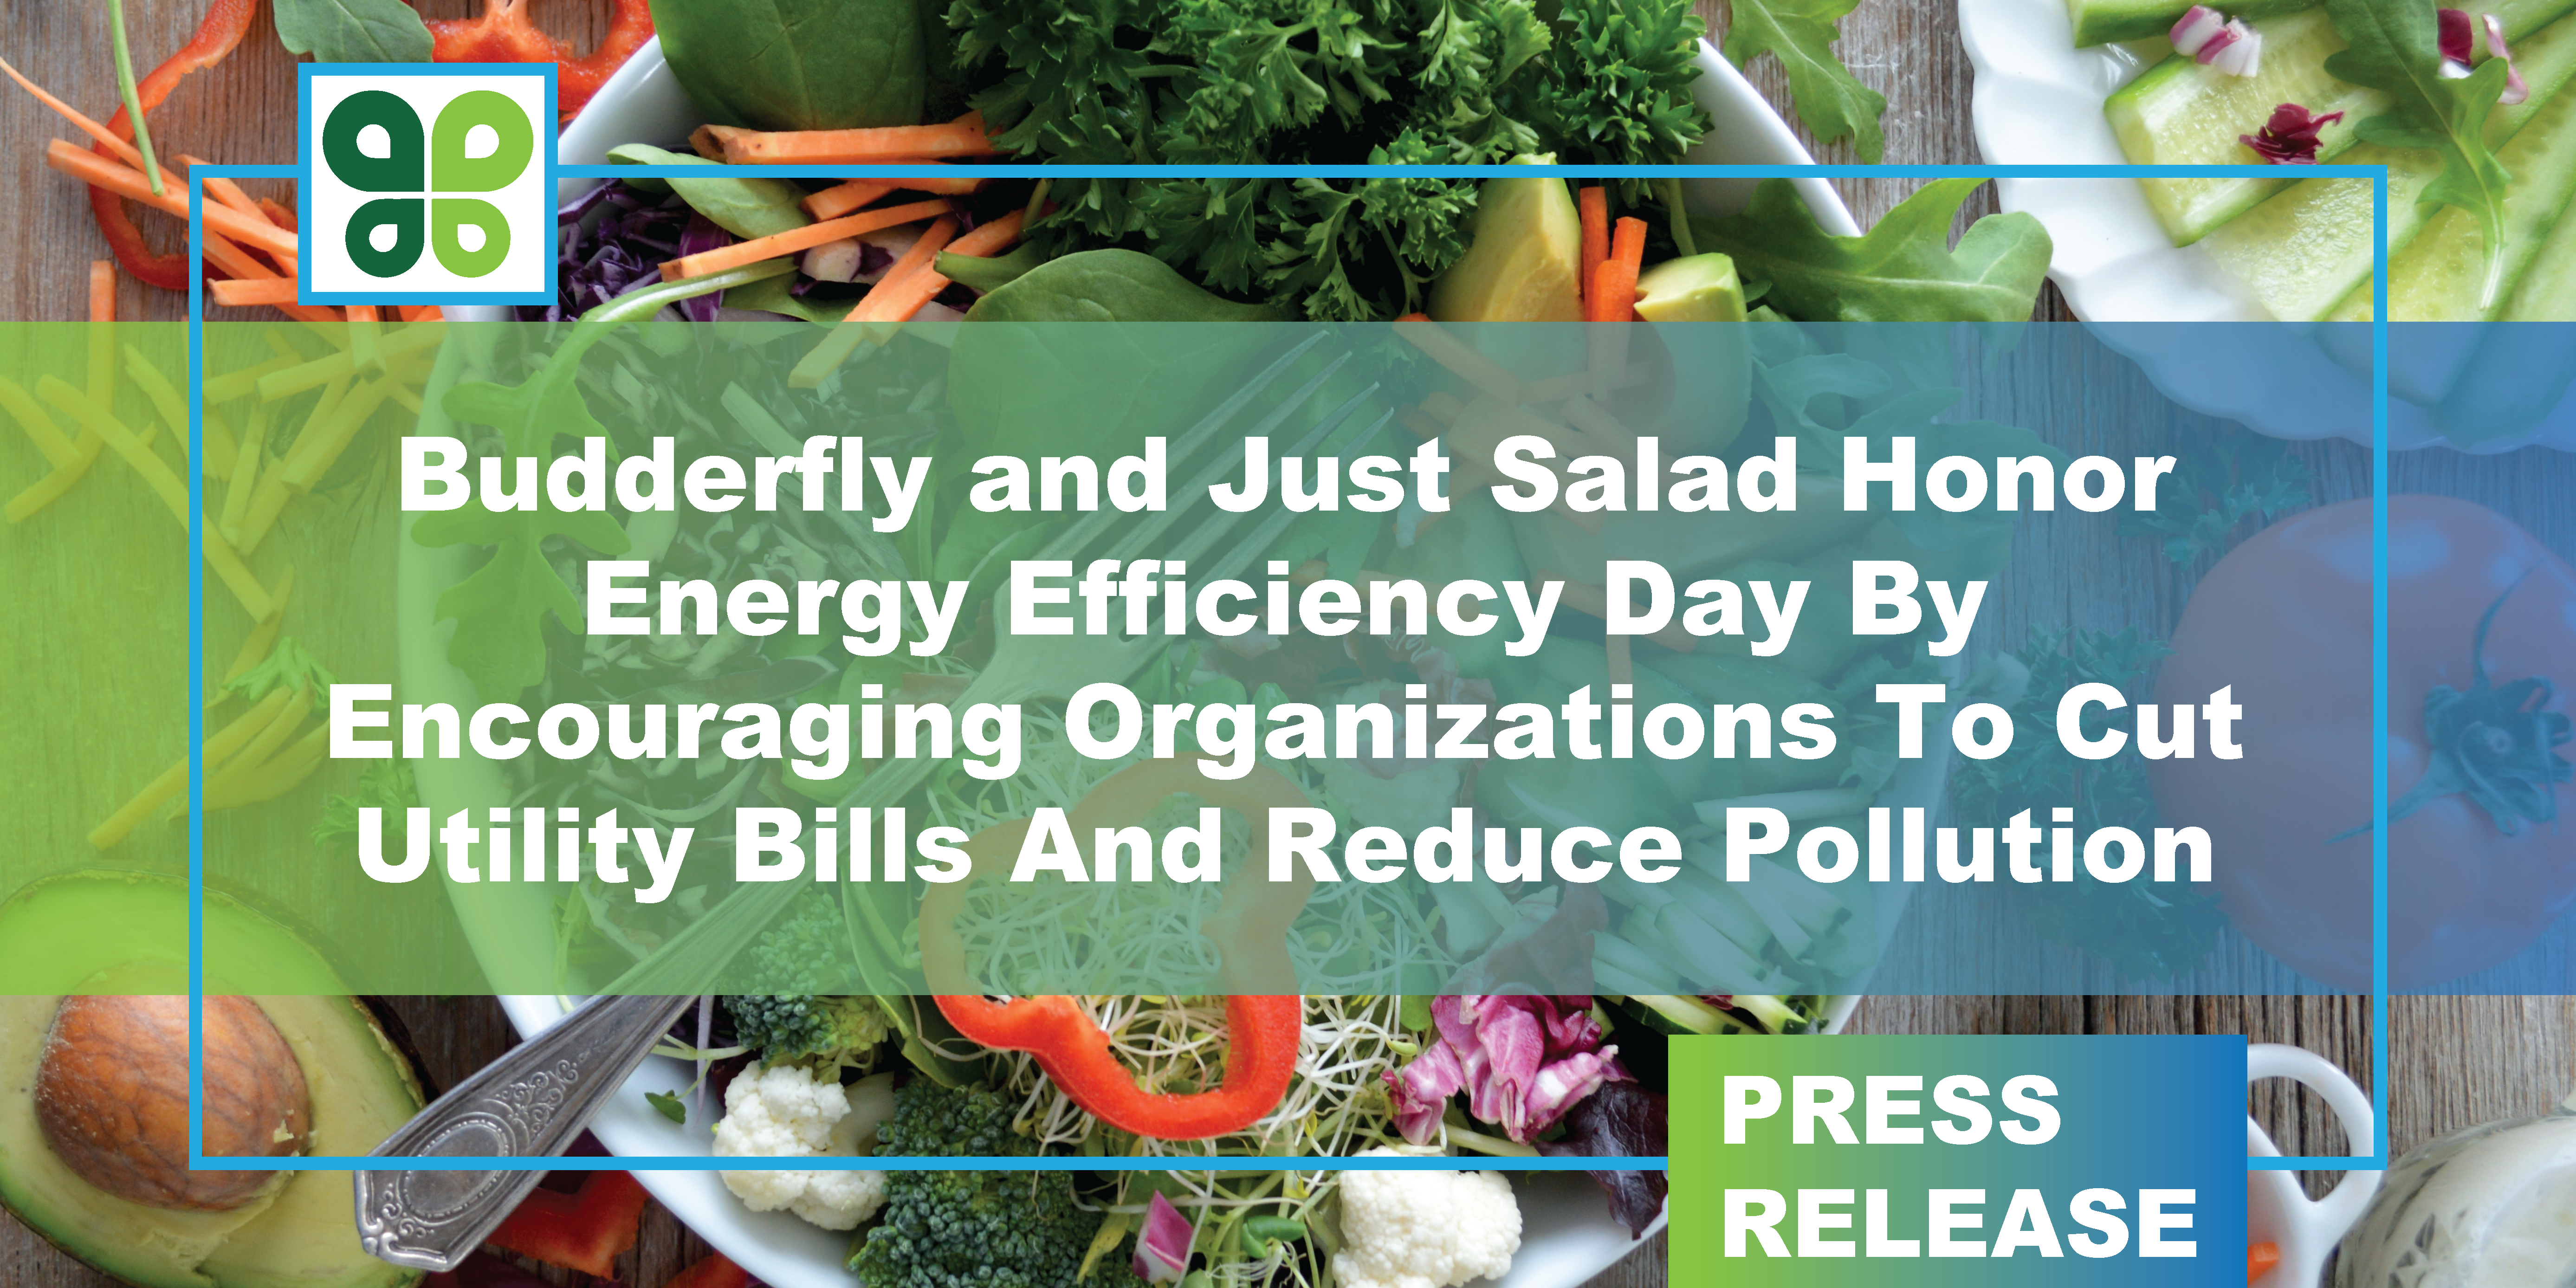 Budderfly and Just Salad Honor Energy Efficiency Day By Encouraging Organizations To Cut Utility Bills And Reduce Pollution